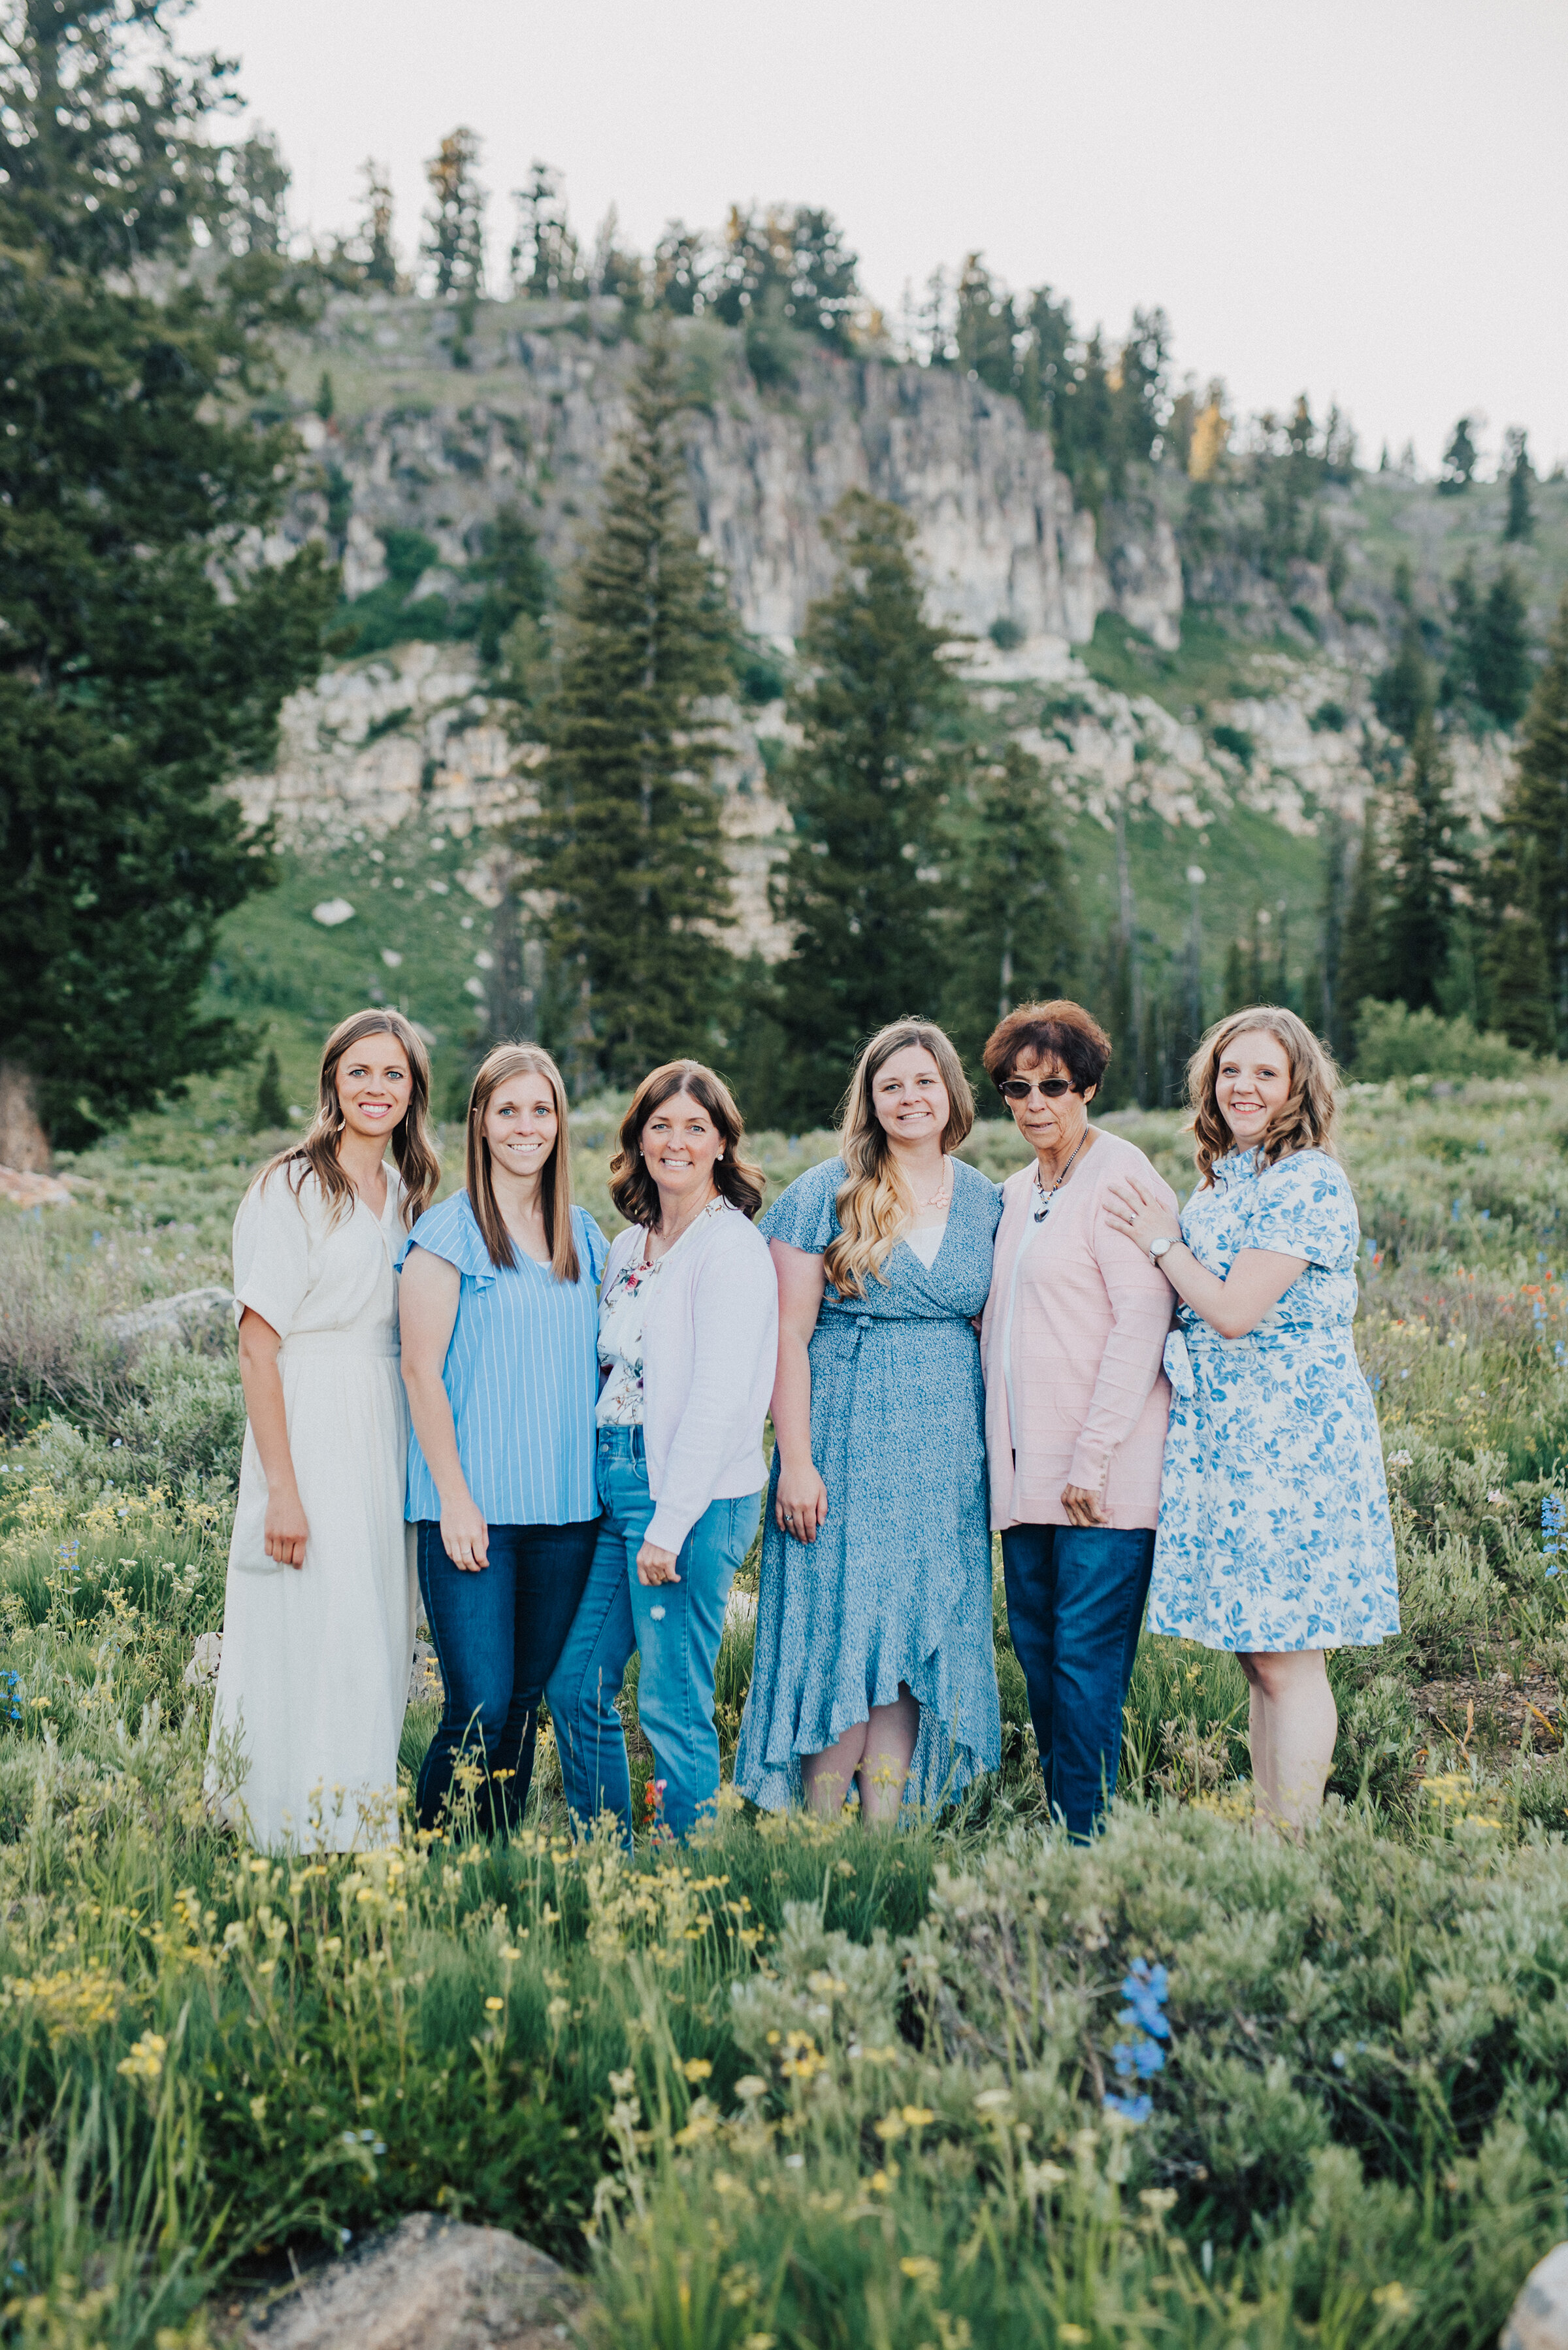  All the ladies together for this dreamy family photo session surrounded by wild flowers and pine trees up Logan canyon. Logan Utah family photographer Kristi Alyse photography Tony Grove forest nature photos Logan canyon light blue family photos wild flowers grand parents children parents spouses reunited dreamy scenic photo shoot #kristialysephotography #utahphotographer #familyphotography #logancanyon #familyphotos #forest #wildflowers #northernutah #familyportraits #family 